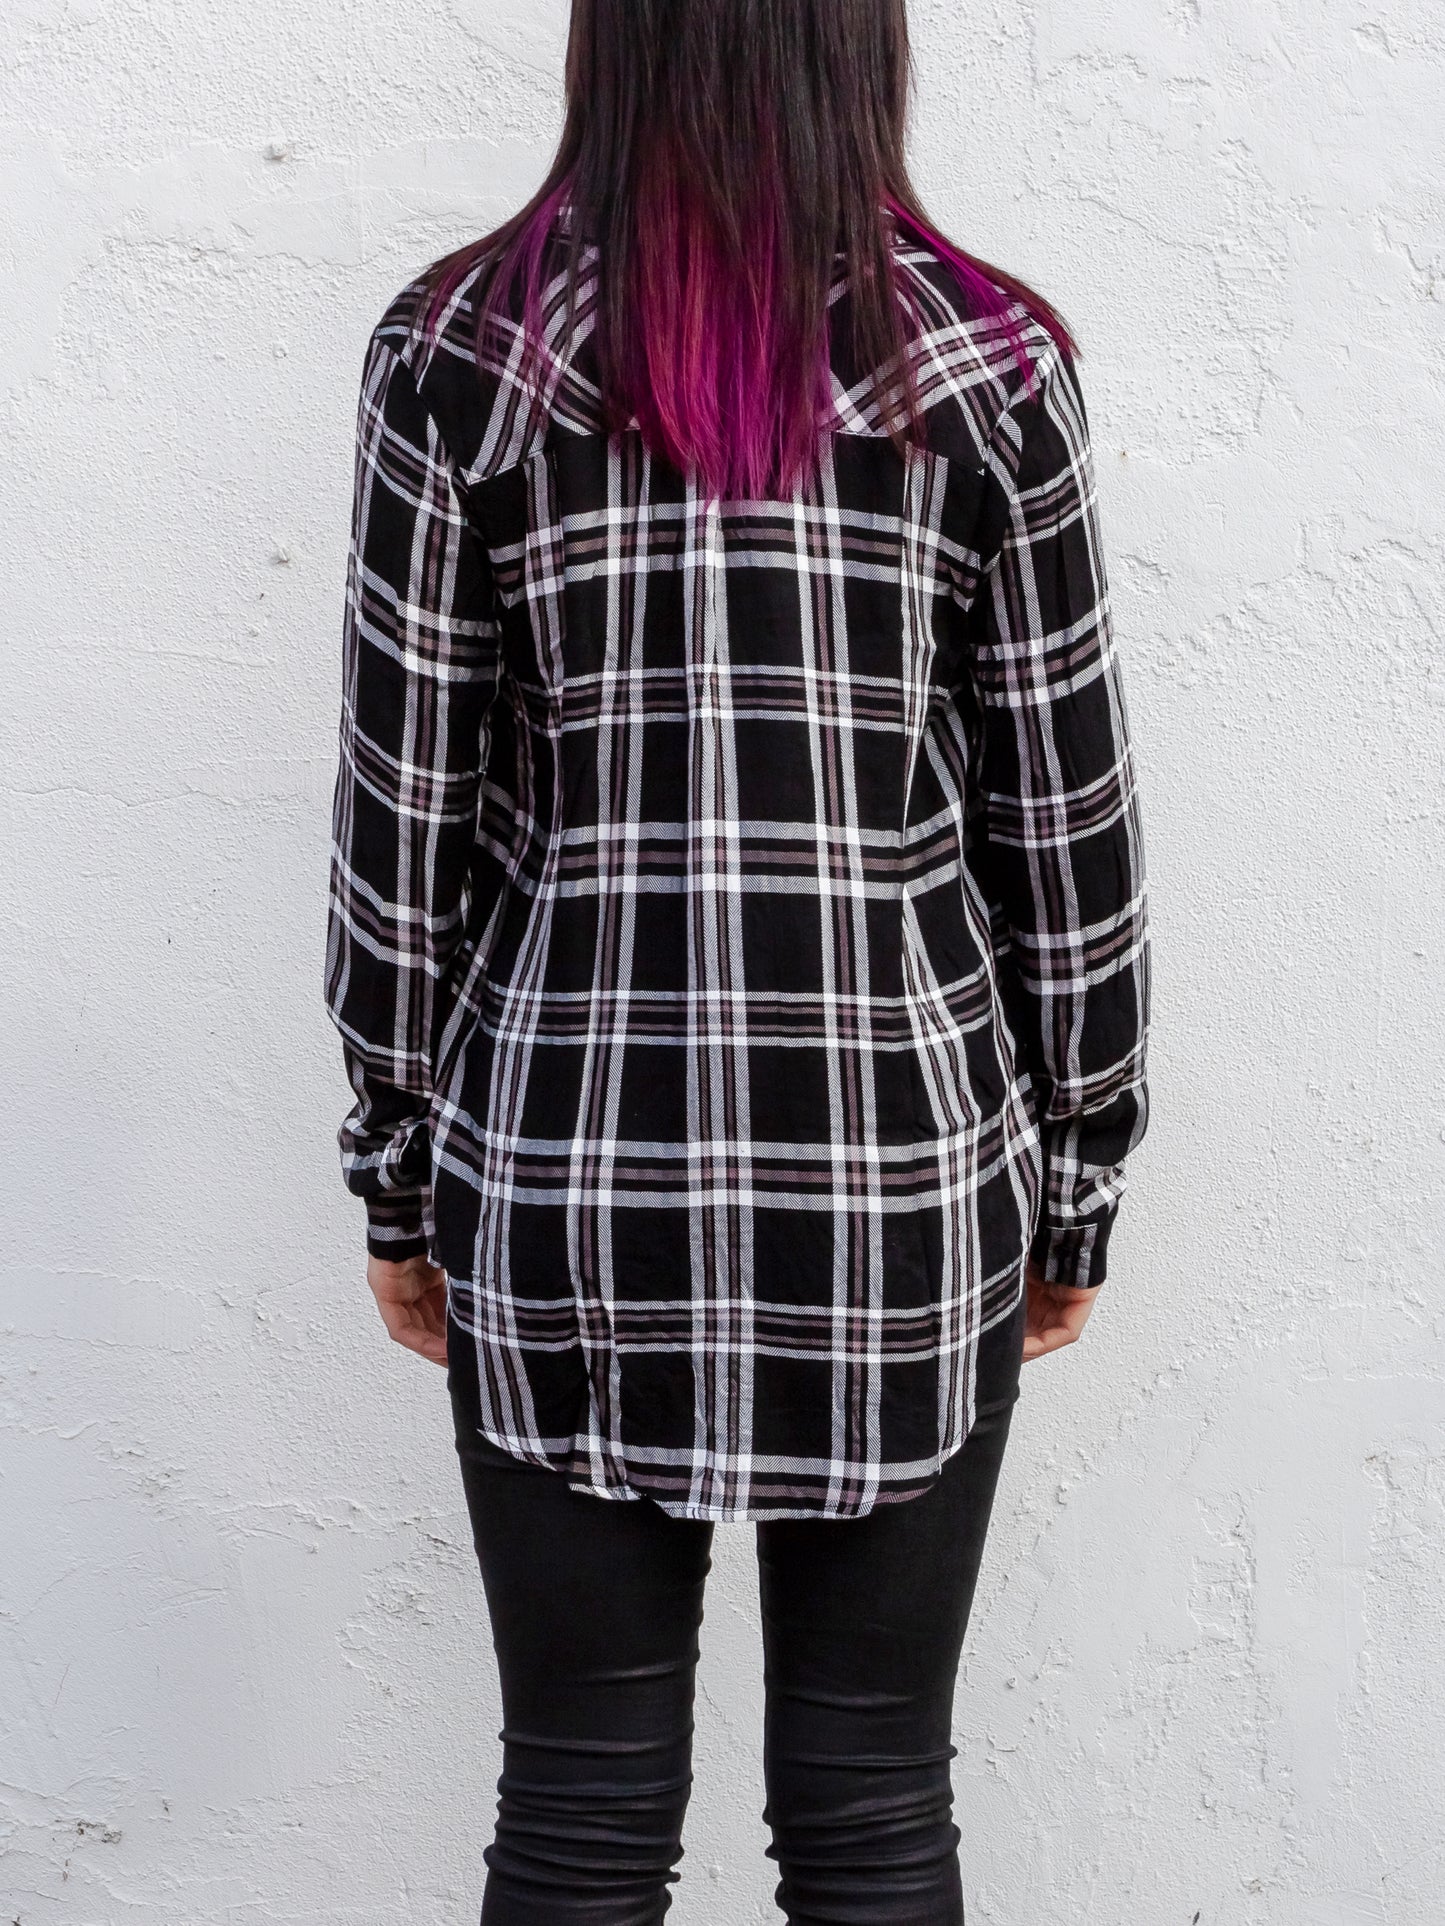 Black and White Oversized Plaid Rayon Top